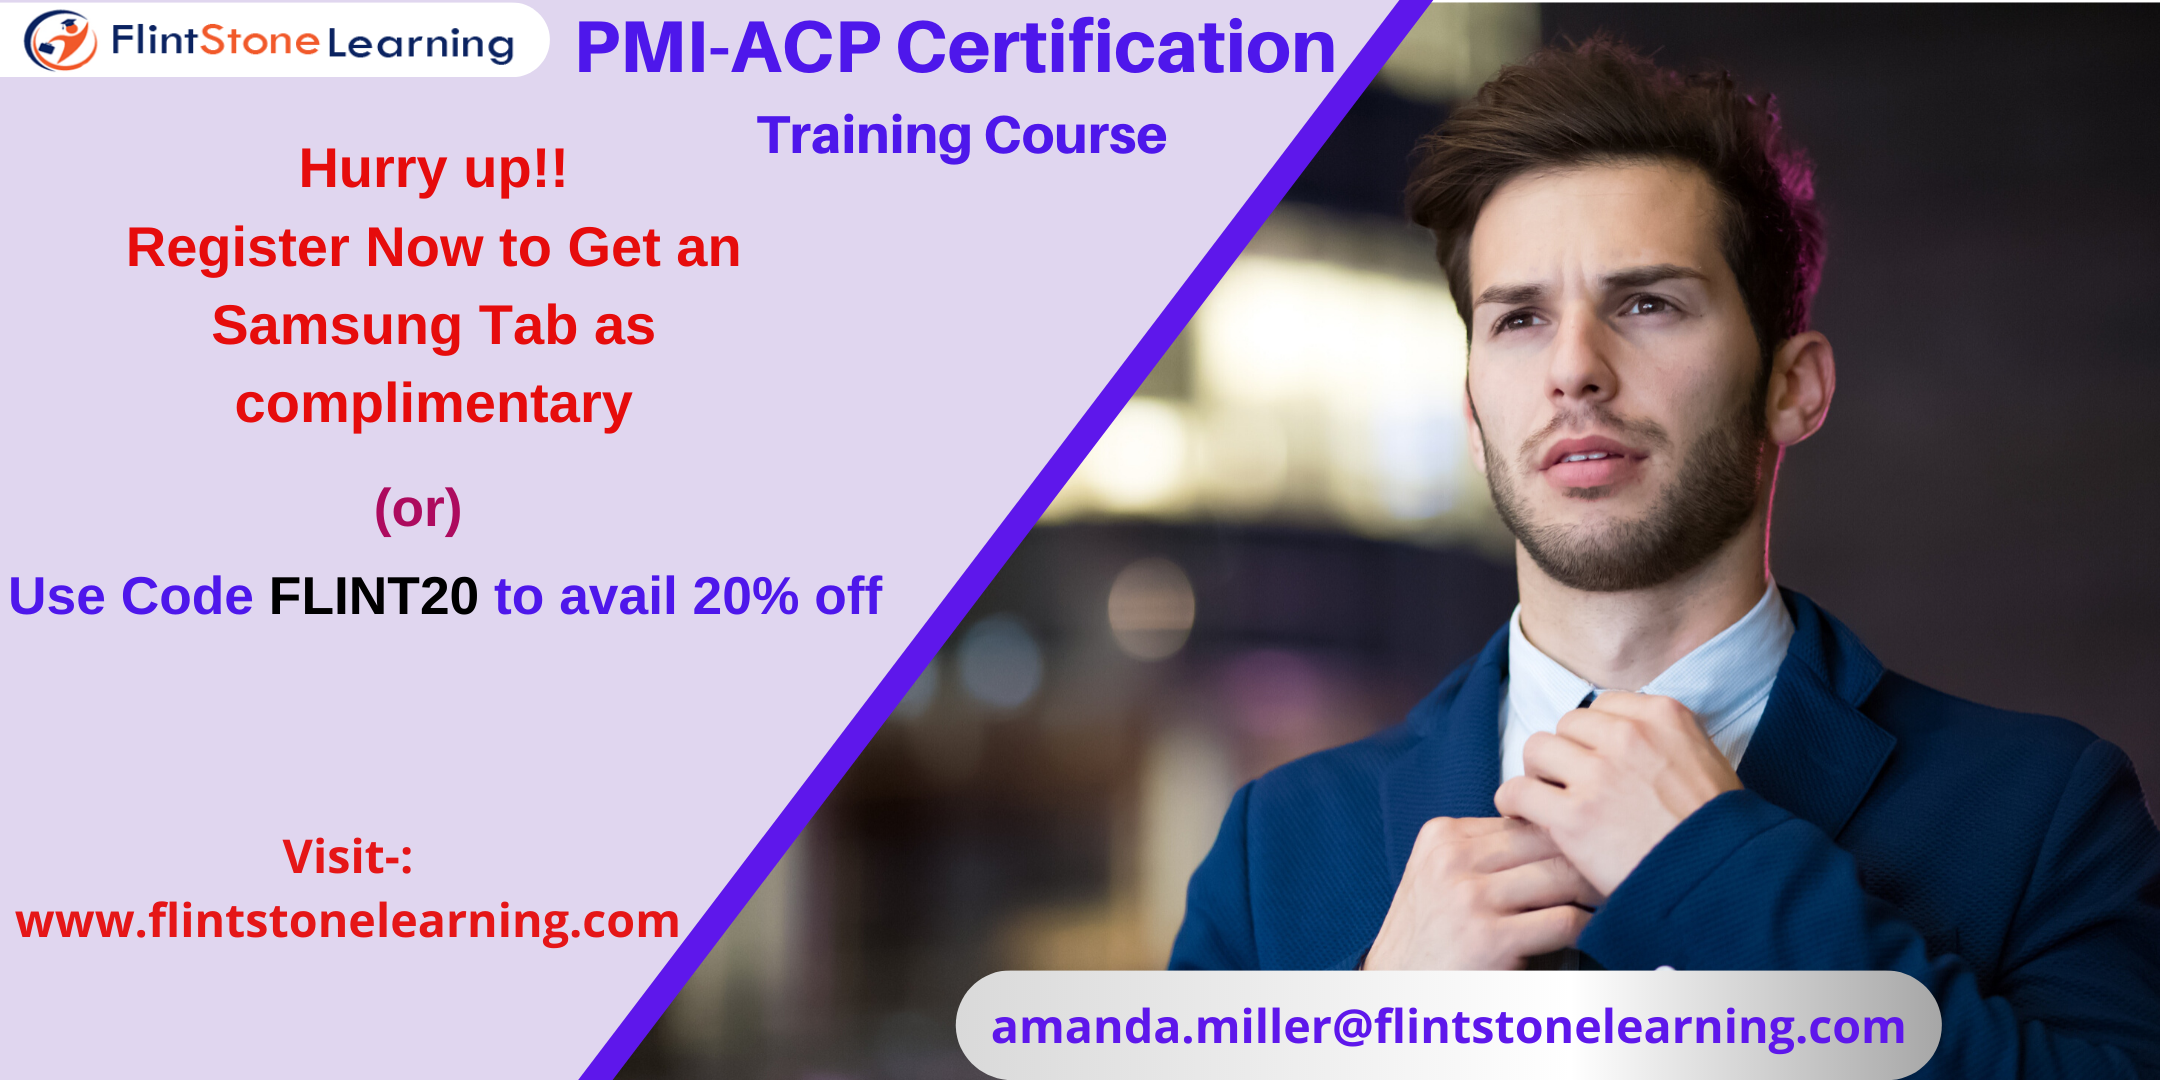 PMI-ACP Certification Training Course in Clearwater, FL